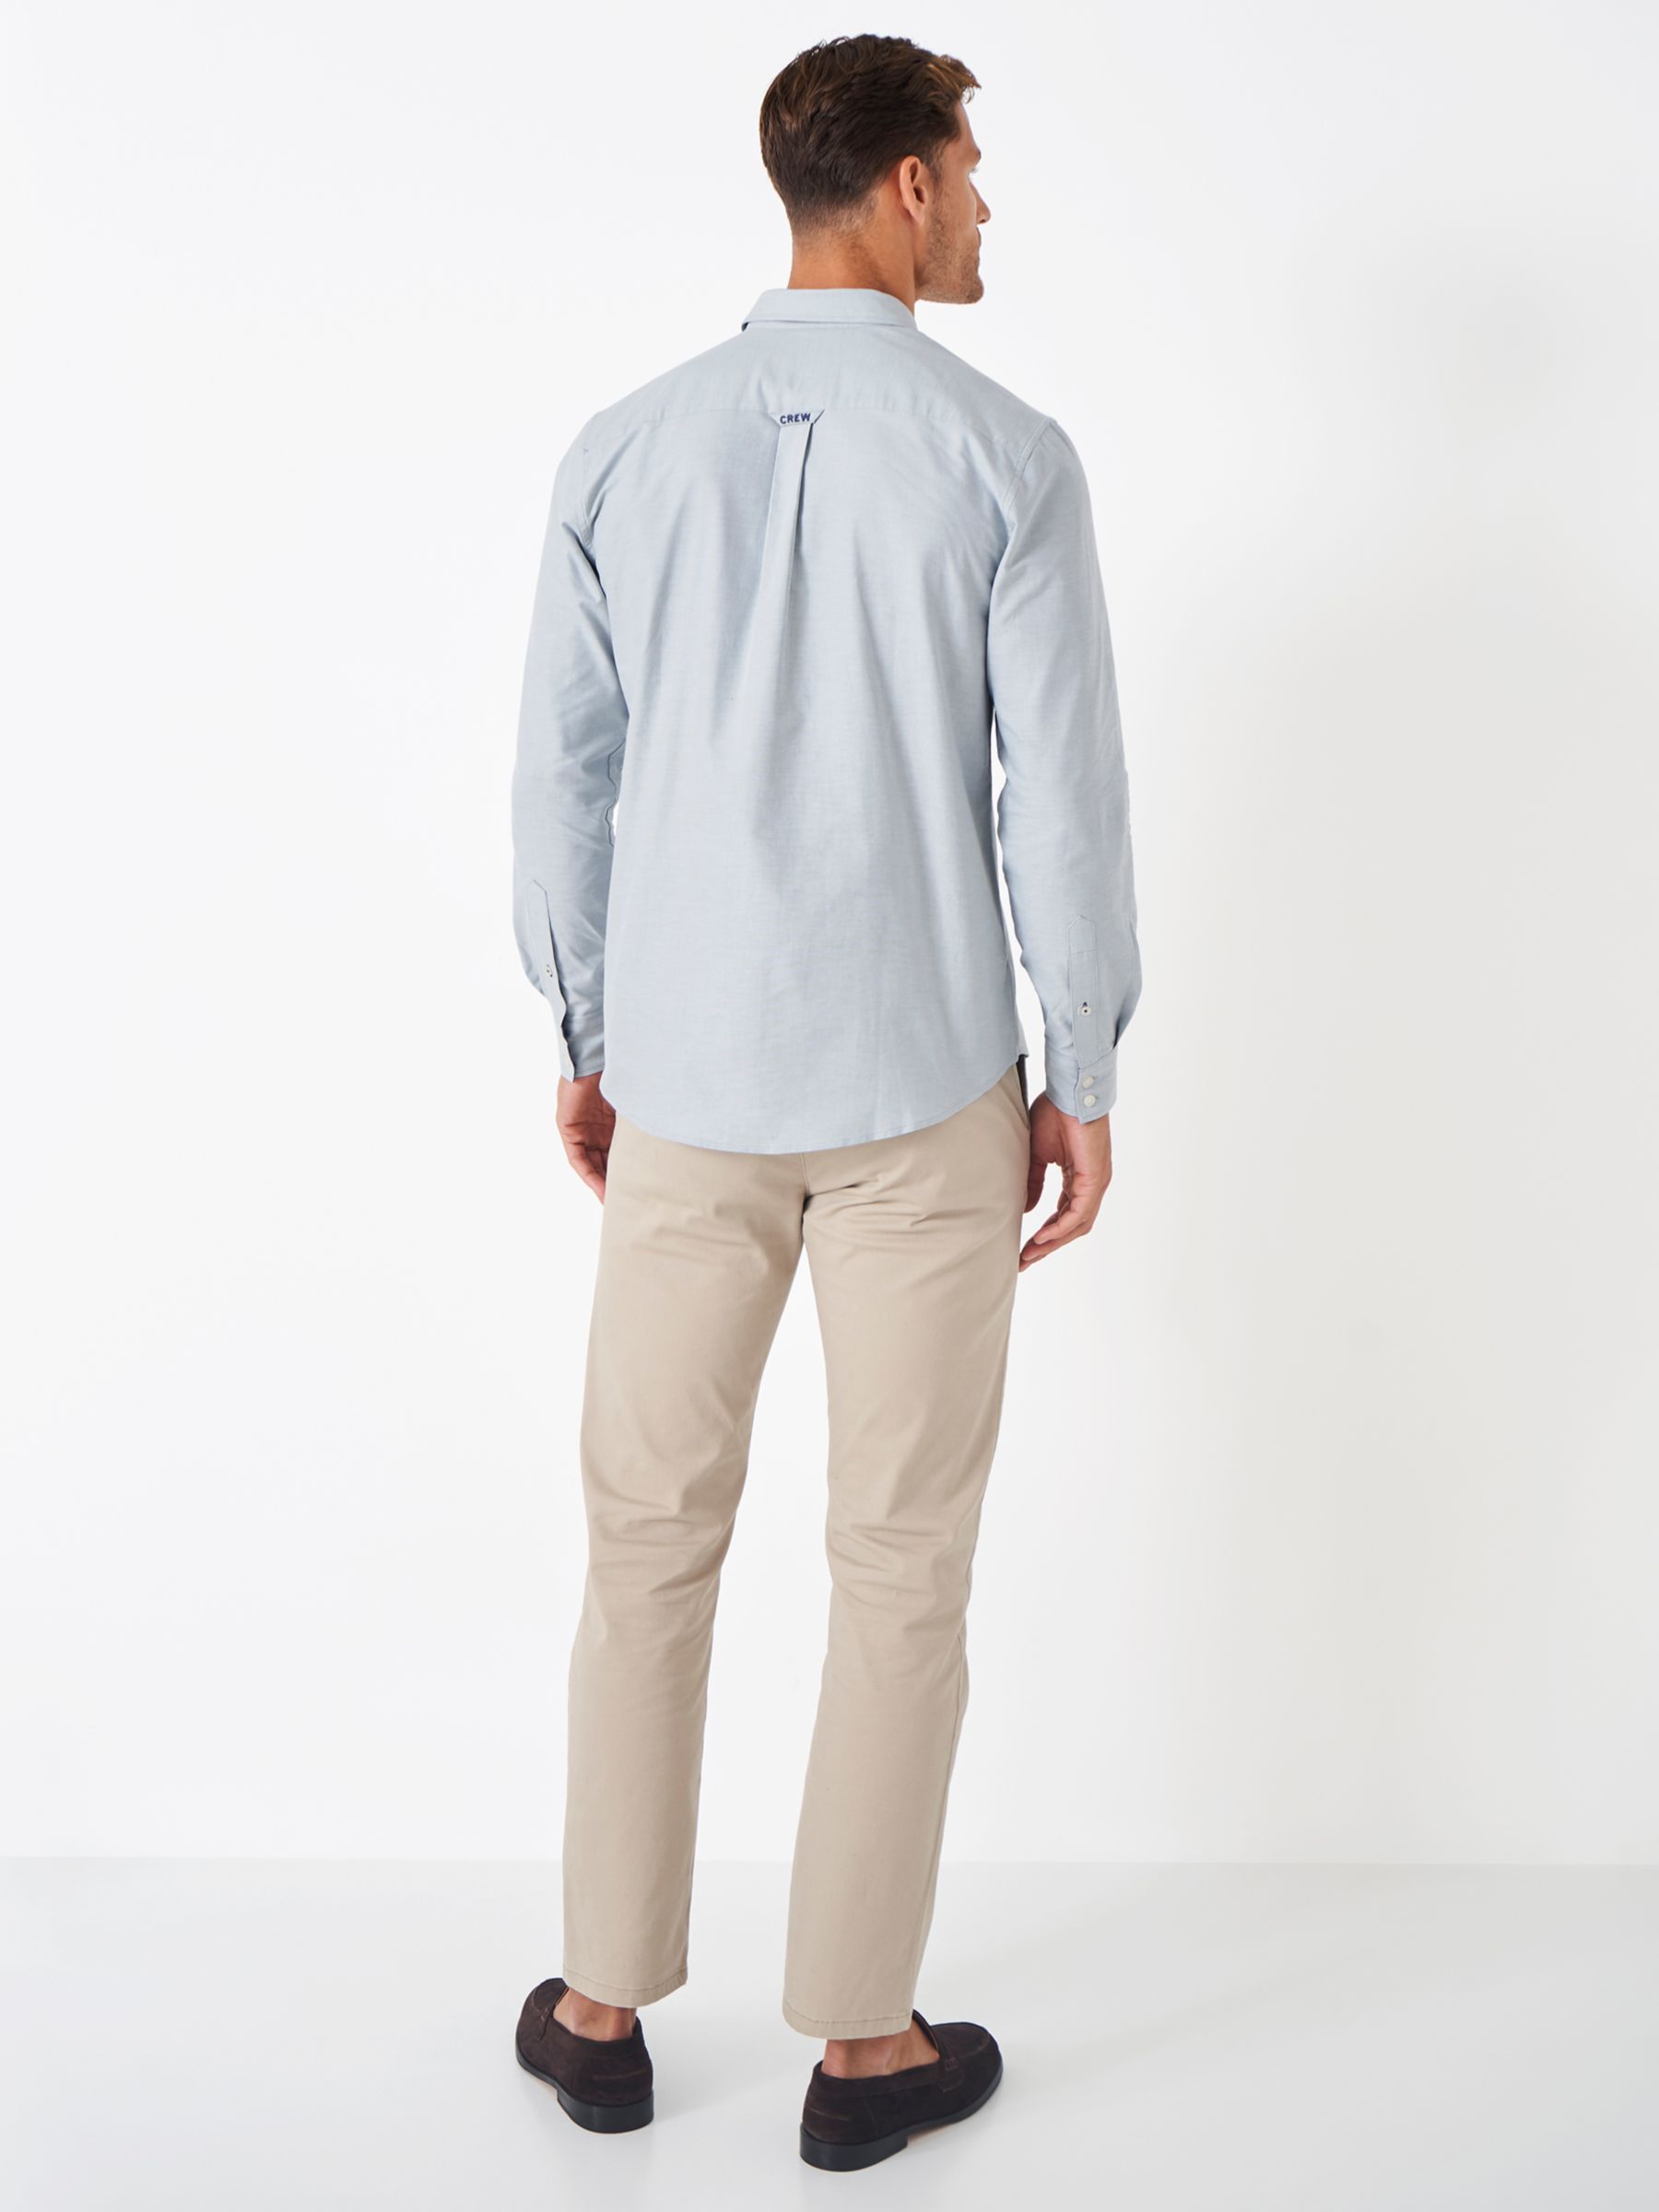 Buy Crew Clothing Classic Fit Oxford Shirt Online at johnlewis.com